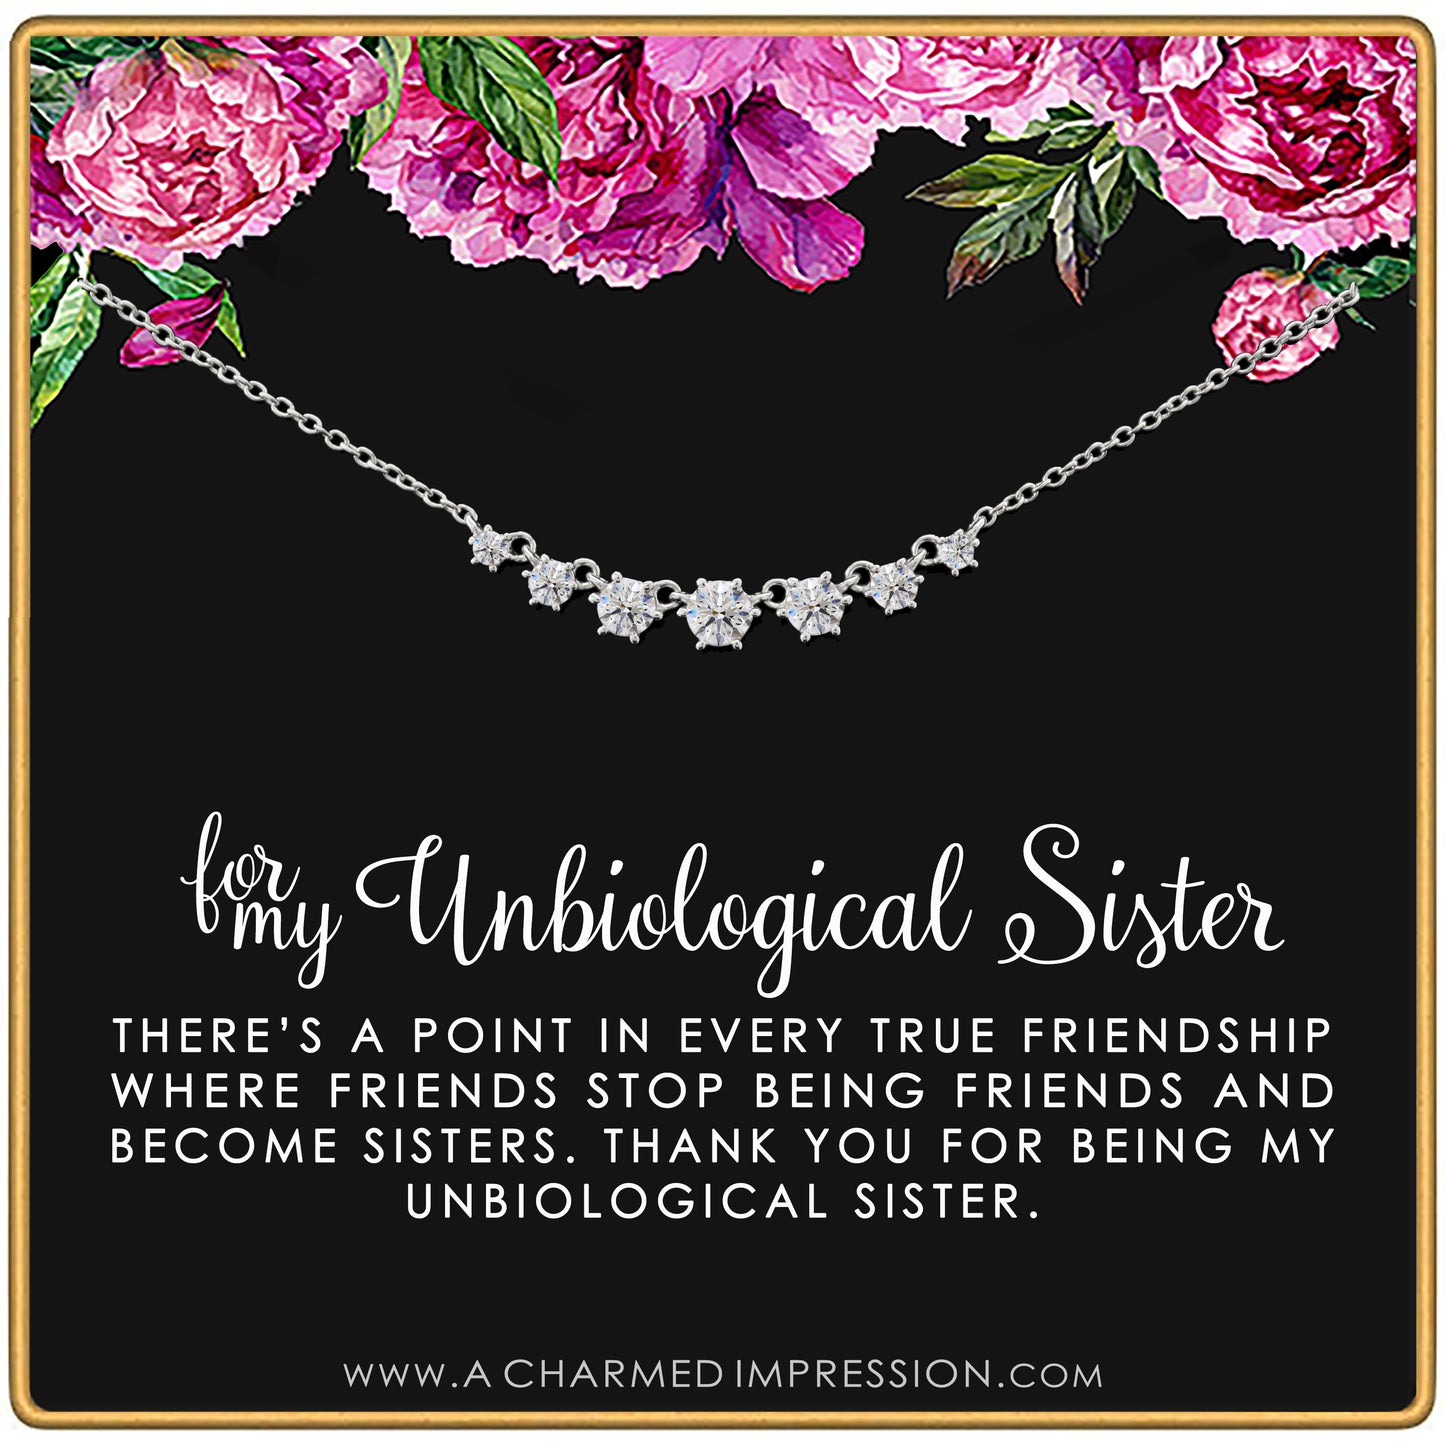 Best Friend Gifts for Women • Unbiological Sister • Christmas Gifts for Women • Stepsister Gifts • Love Friendship • Bonus Sister Necklaces for 2 3 • 7 Crystal Necklace